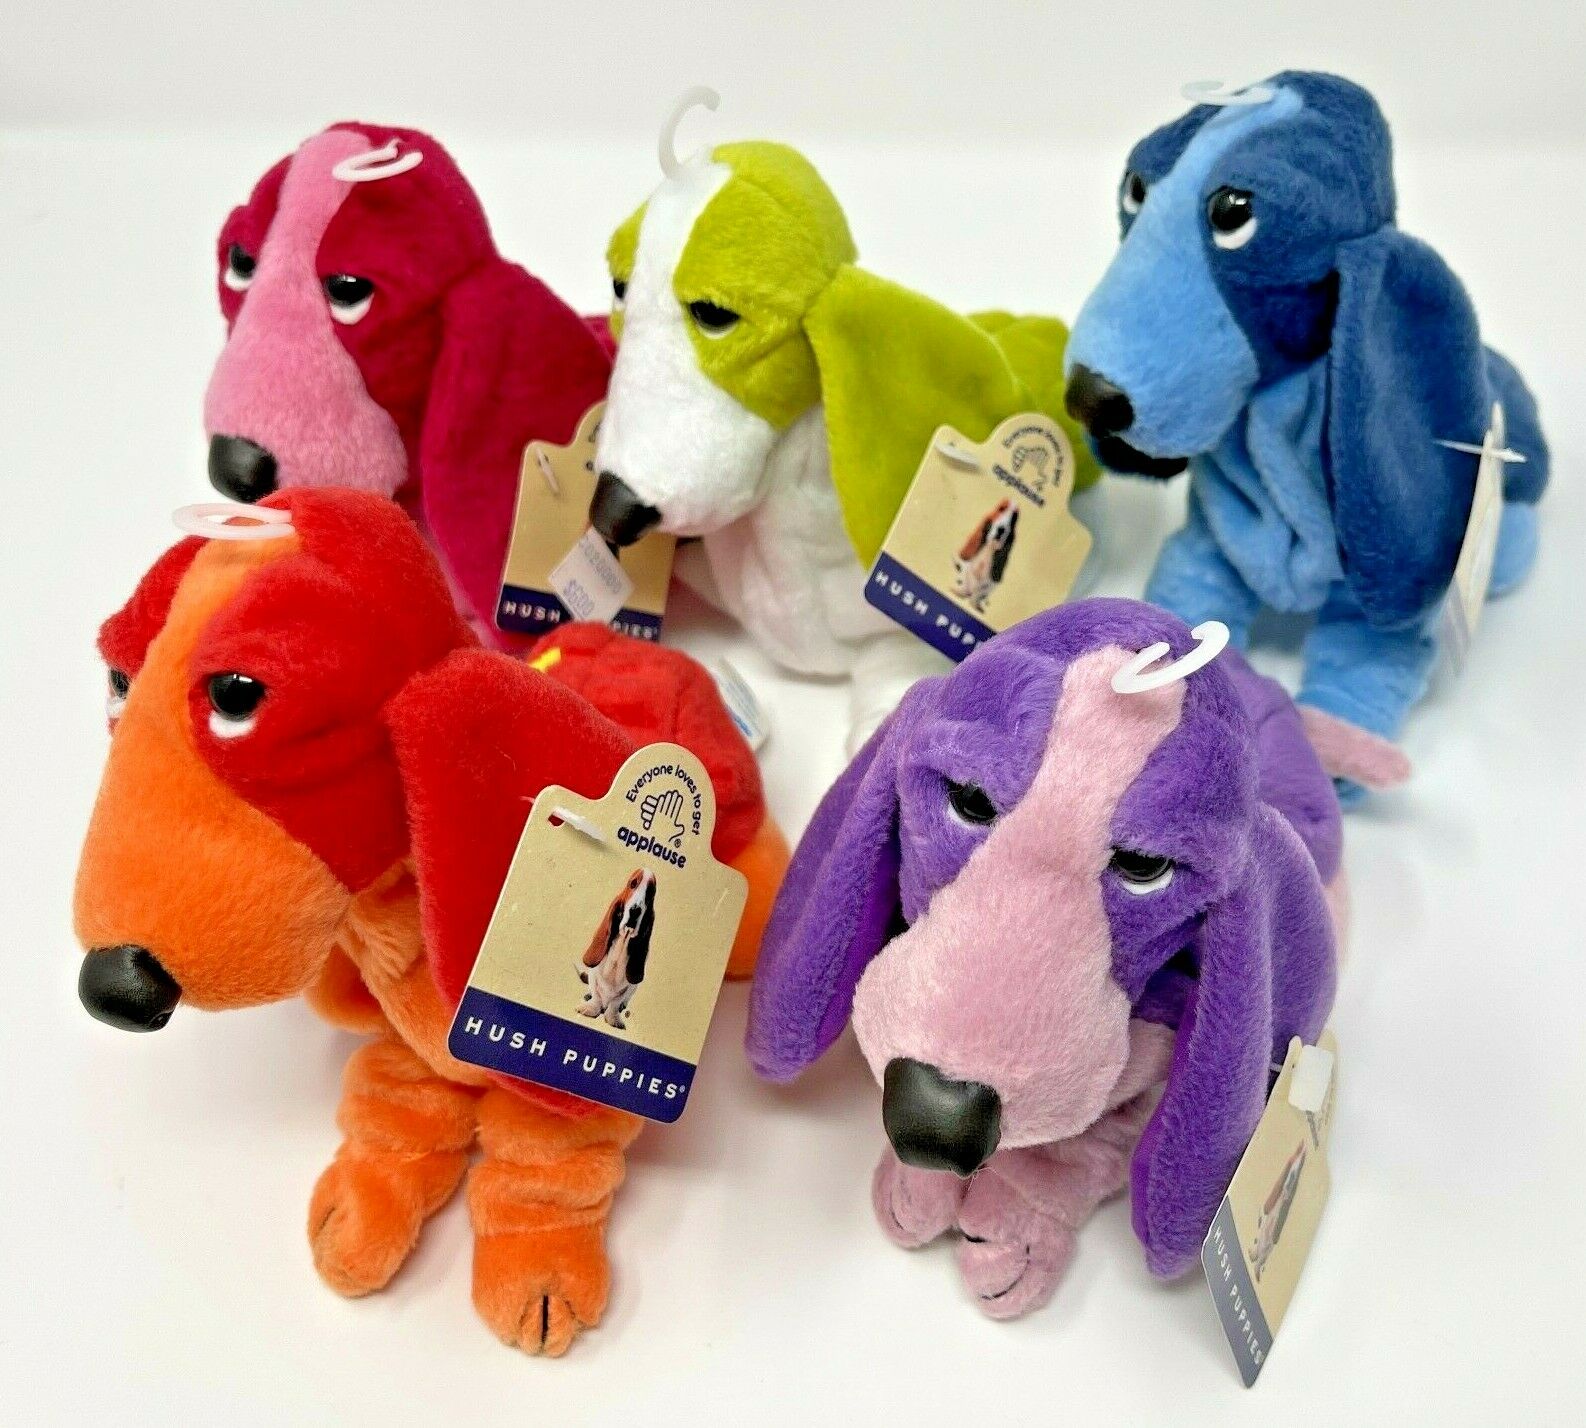 Lot Of 5 Applause Basset Hound Hush Puppies 6" Plush Doll Beanie Bag Tagged New